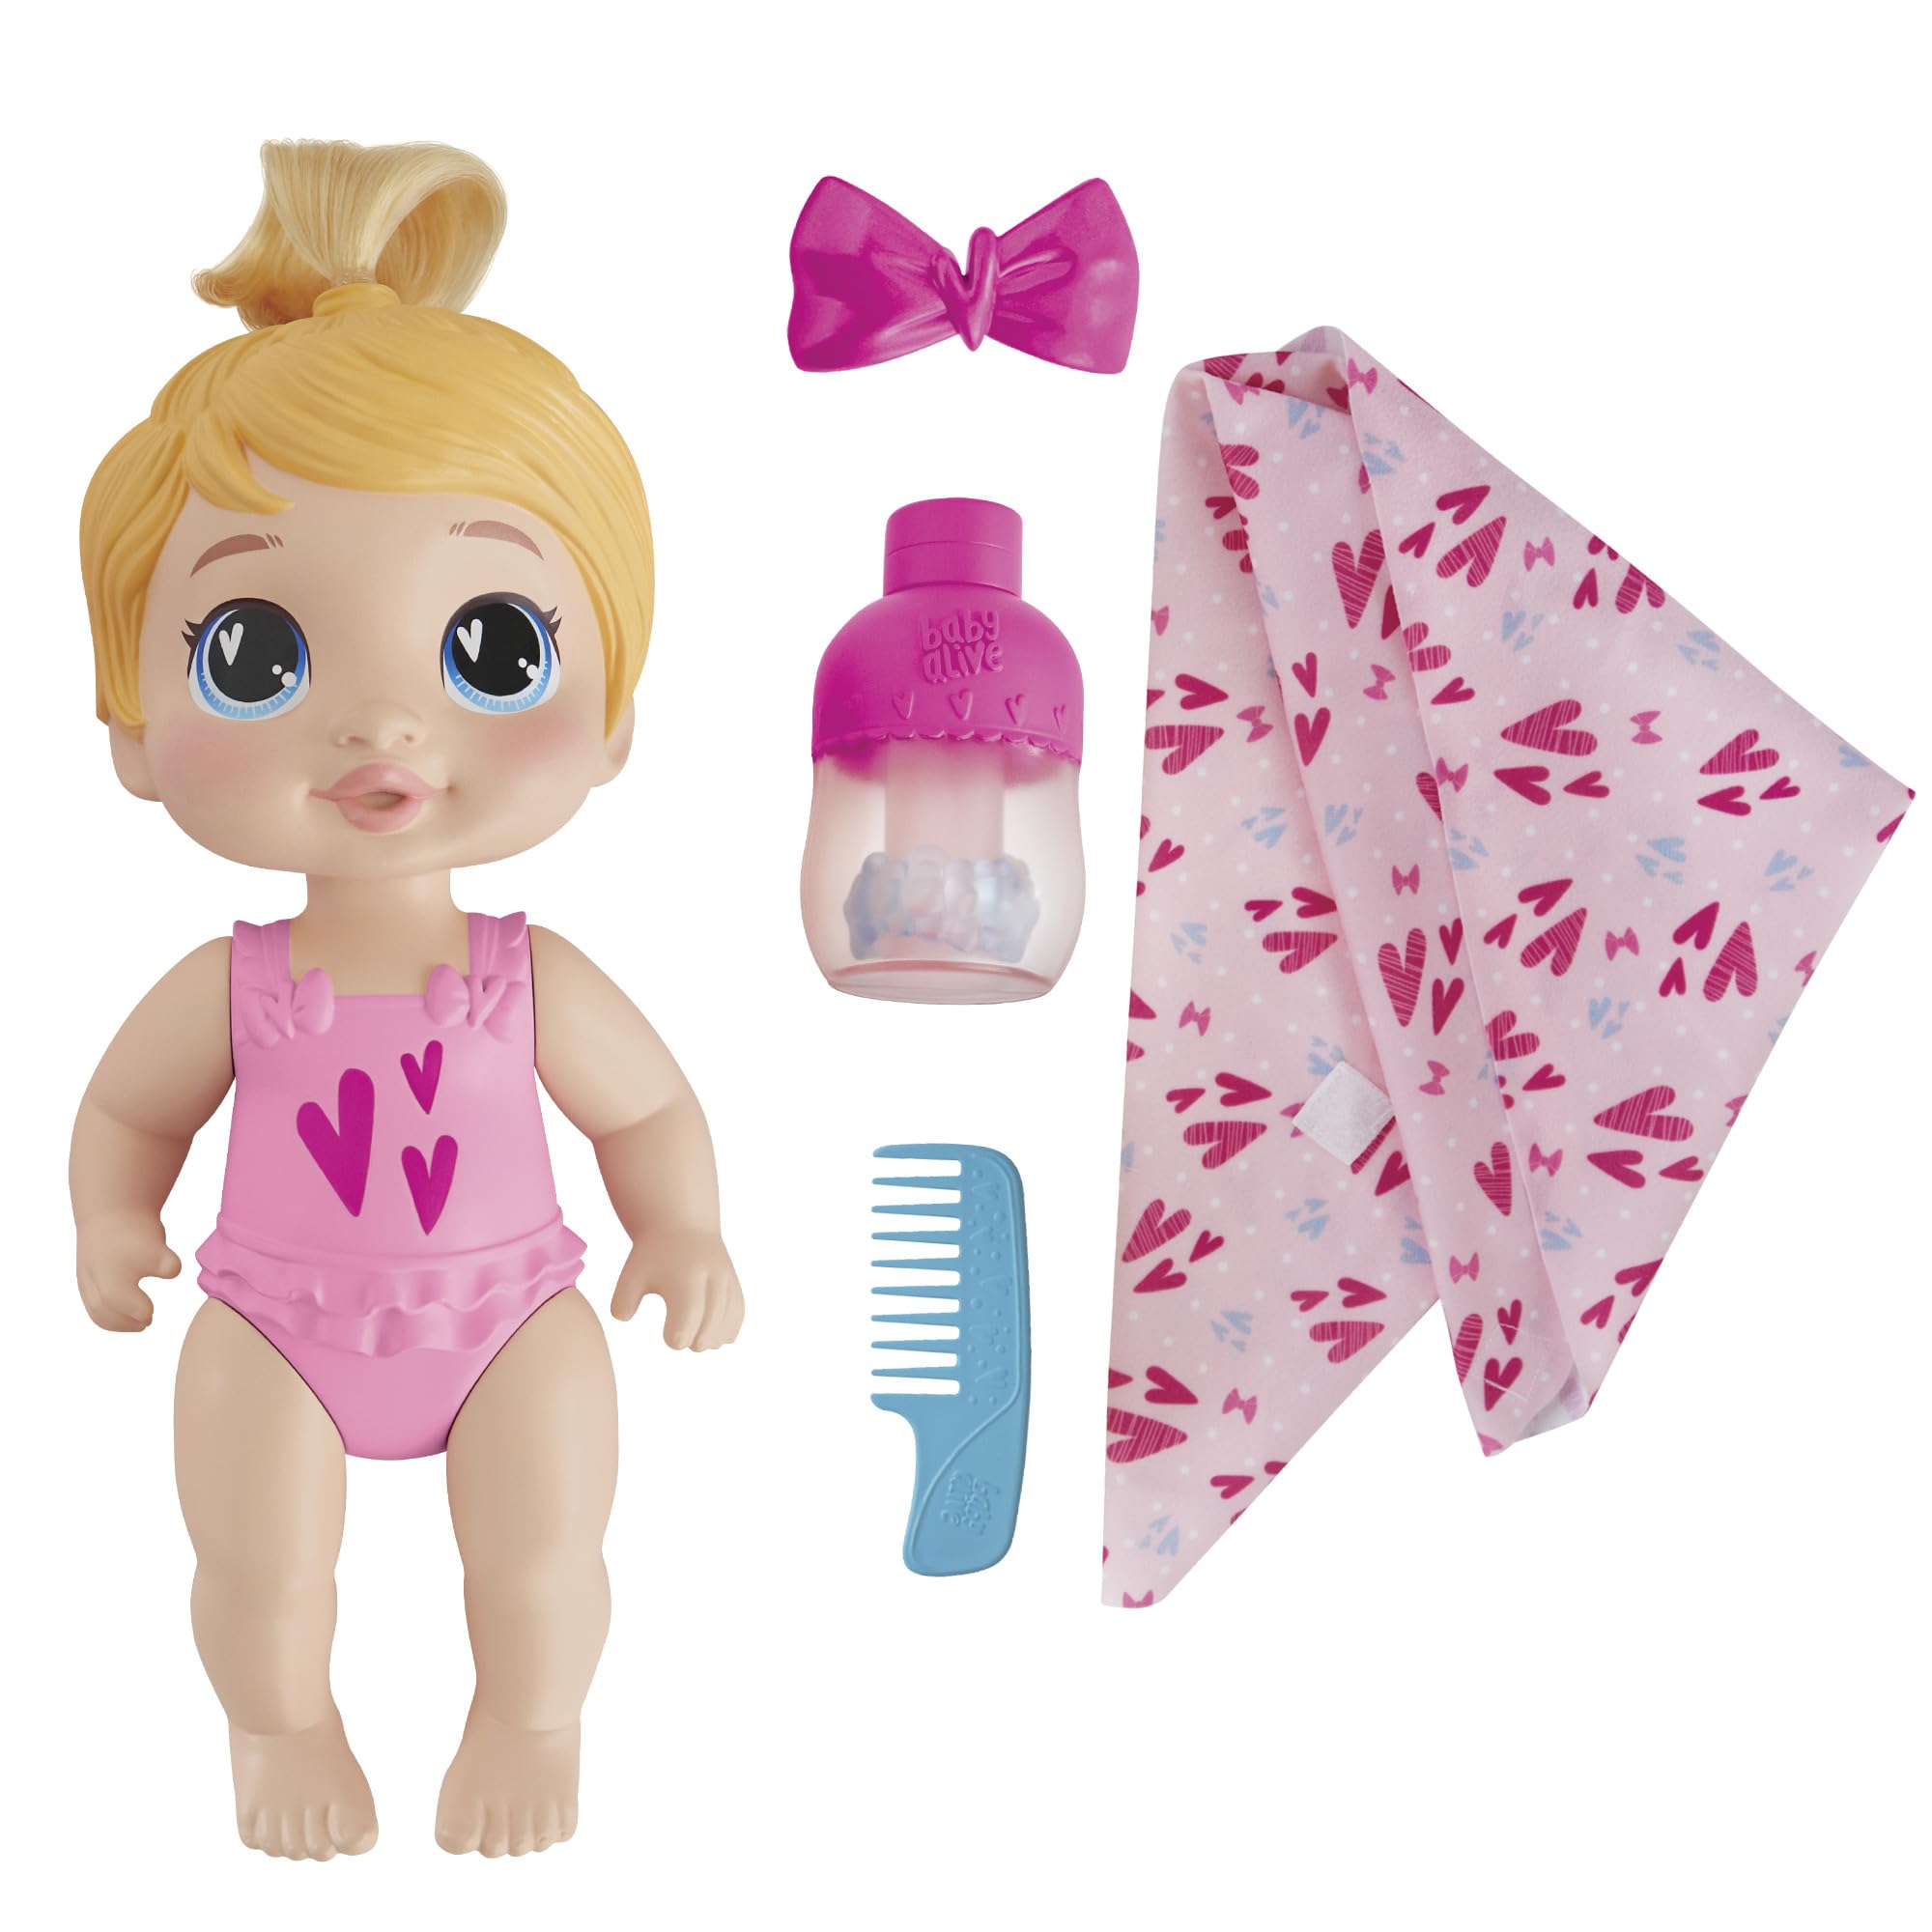 Baby Alive Shampoo Snuggle Harper Hugs Blonde Hair 11 Inch Water Baby Doll Playset, Toys for 3 Year Old Girls & Boys & Up